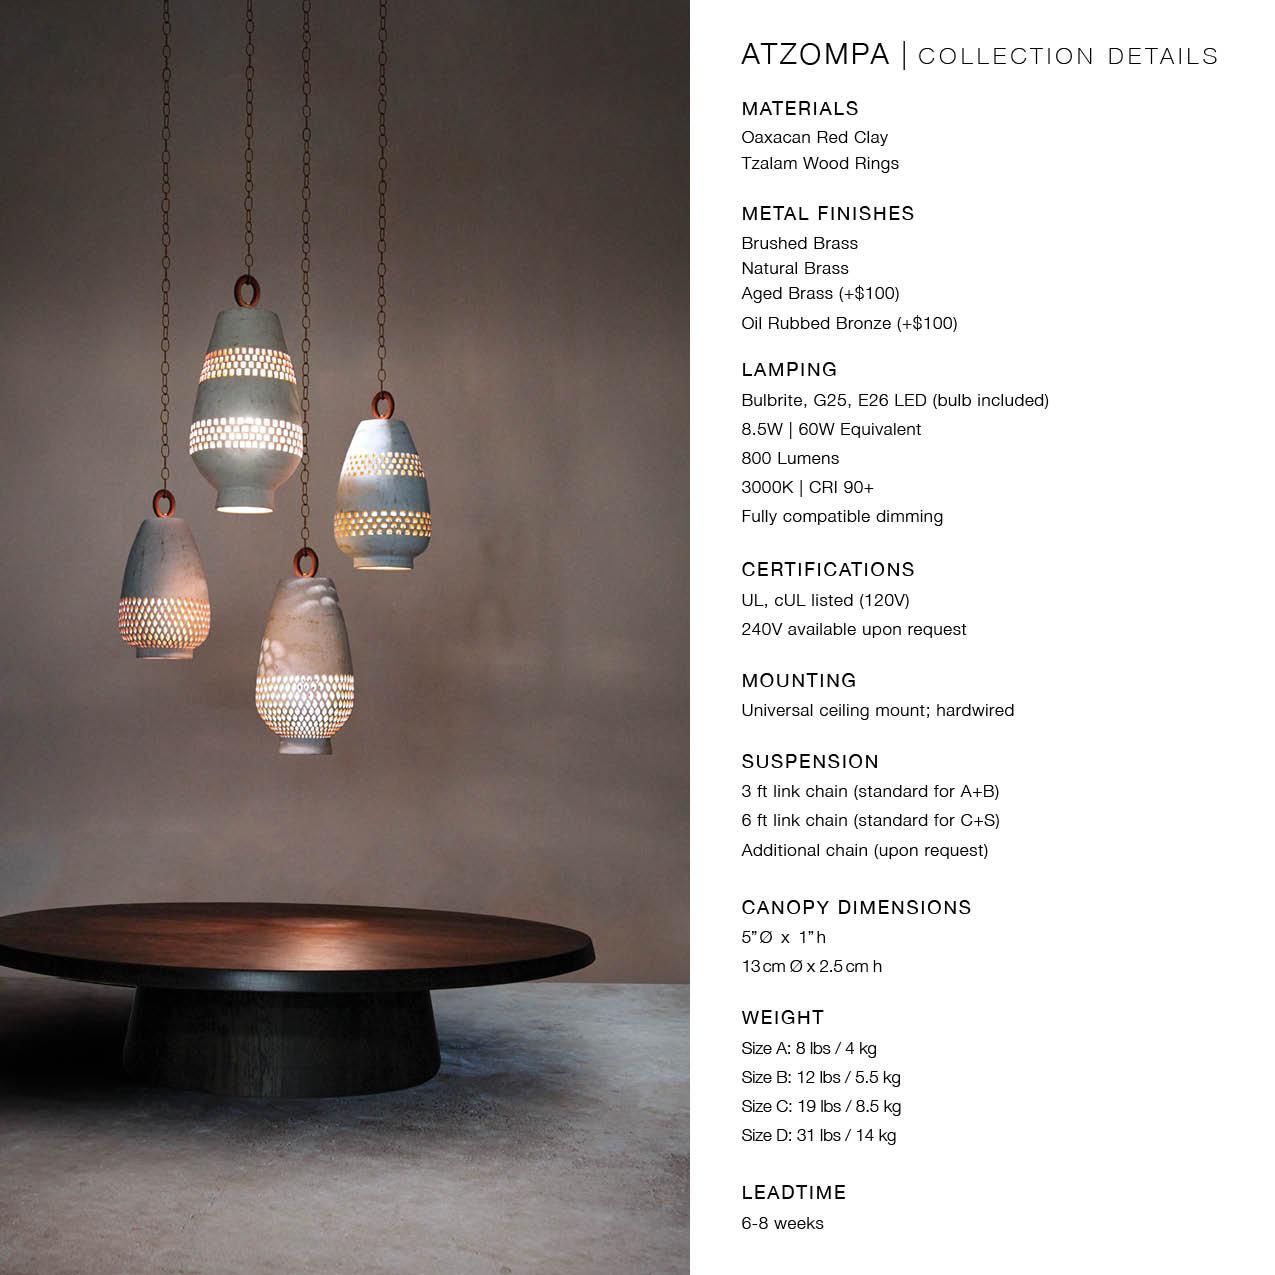 Large White Ceramic Pendant Light, Oiled Bronze, Ajedrez Atzompa Collection In New Condition For Sale In New York, NY